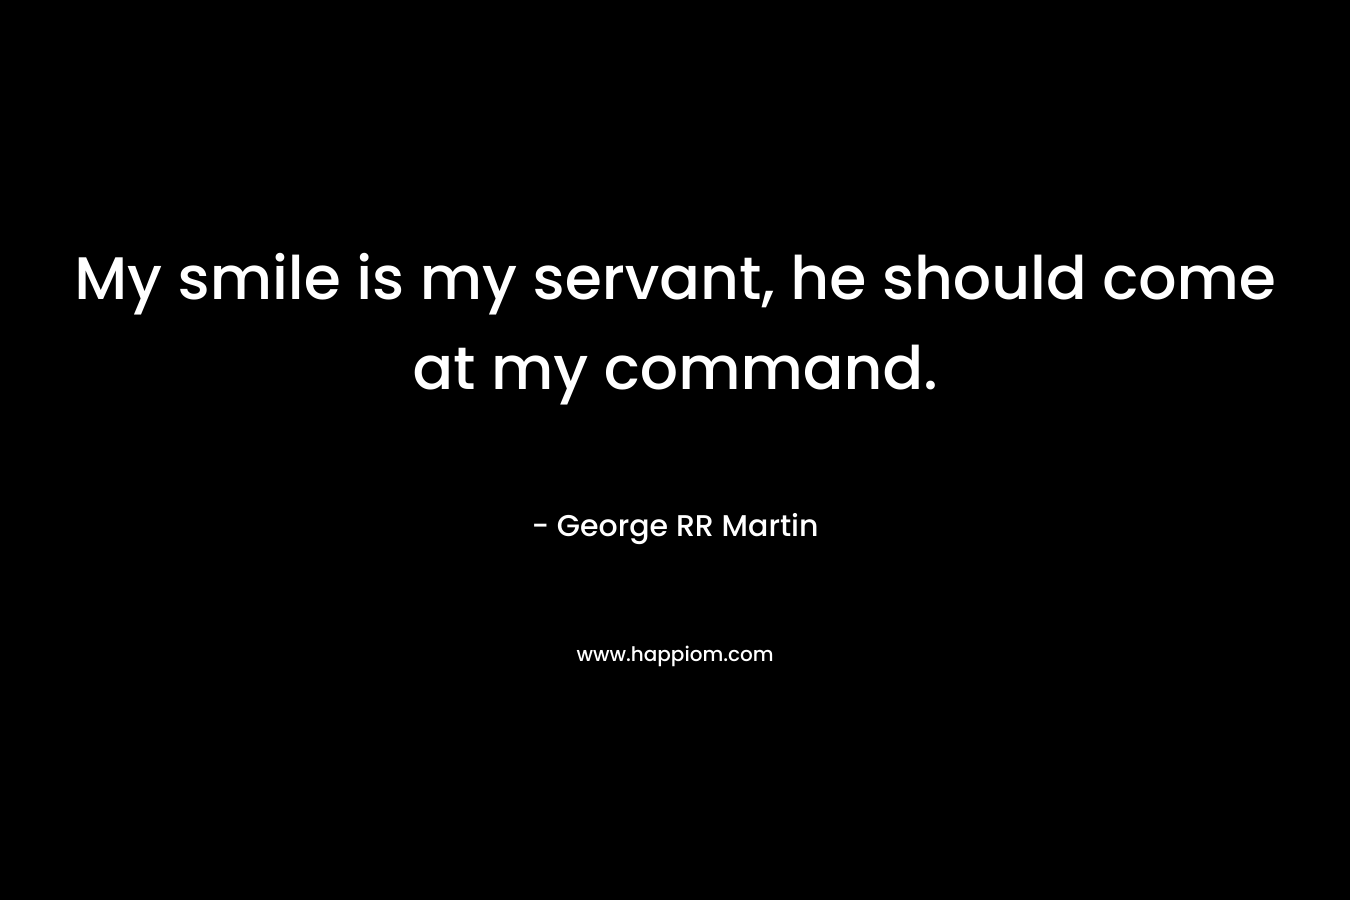 My smile is my servant, he should come at my command.